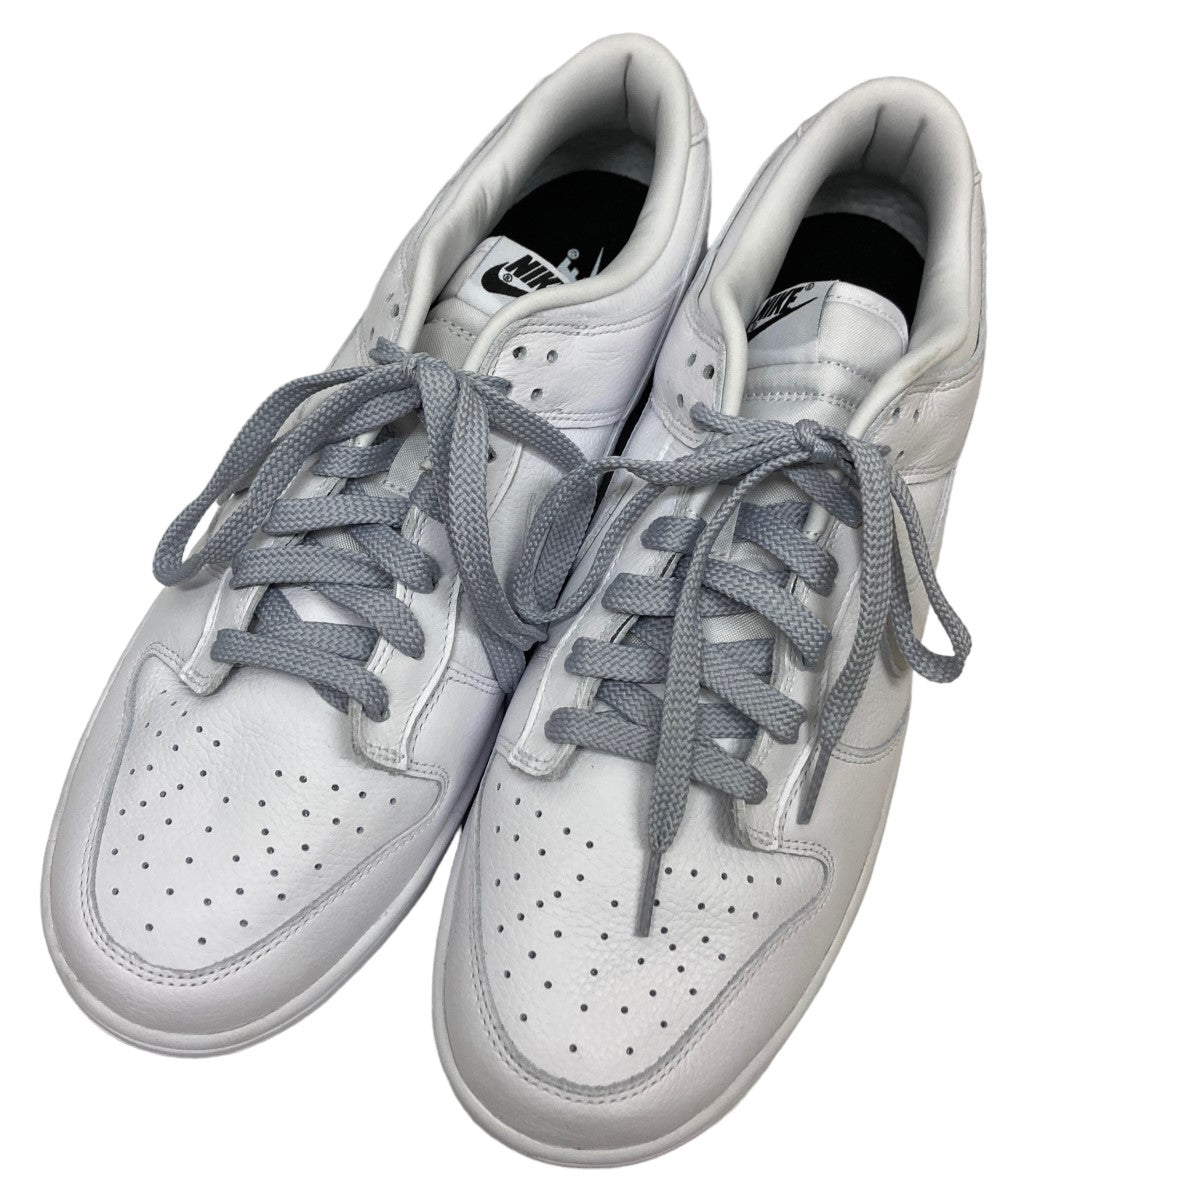 NIKE BY YOU(ナイキ バイ ユー) 「DUNK LOW」 スニーカー AH7979-992 ...